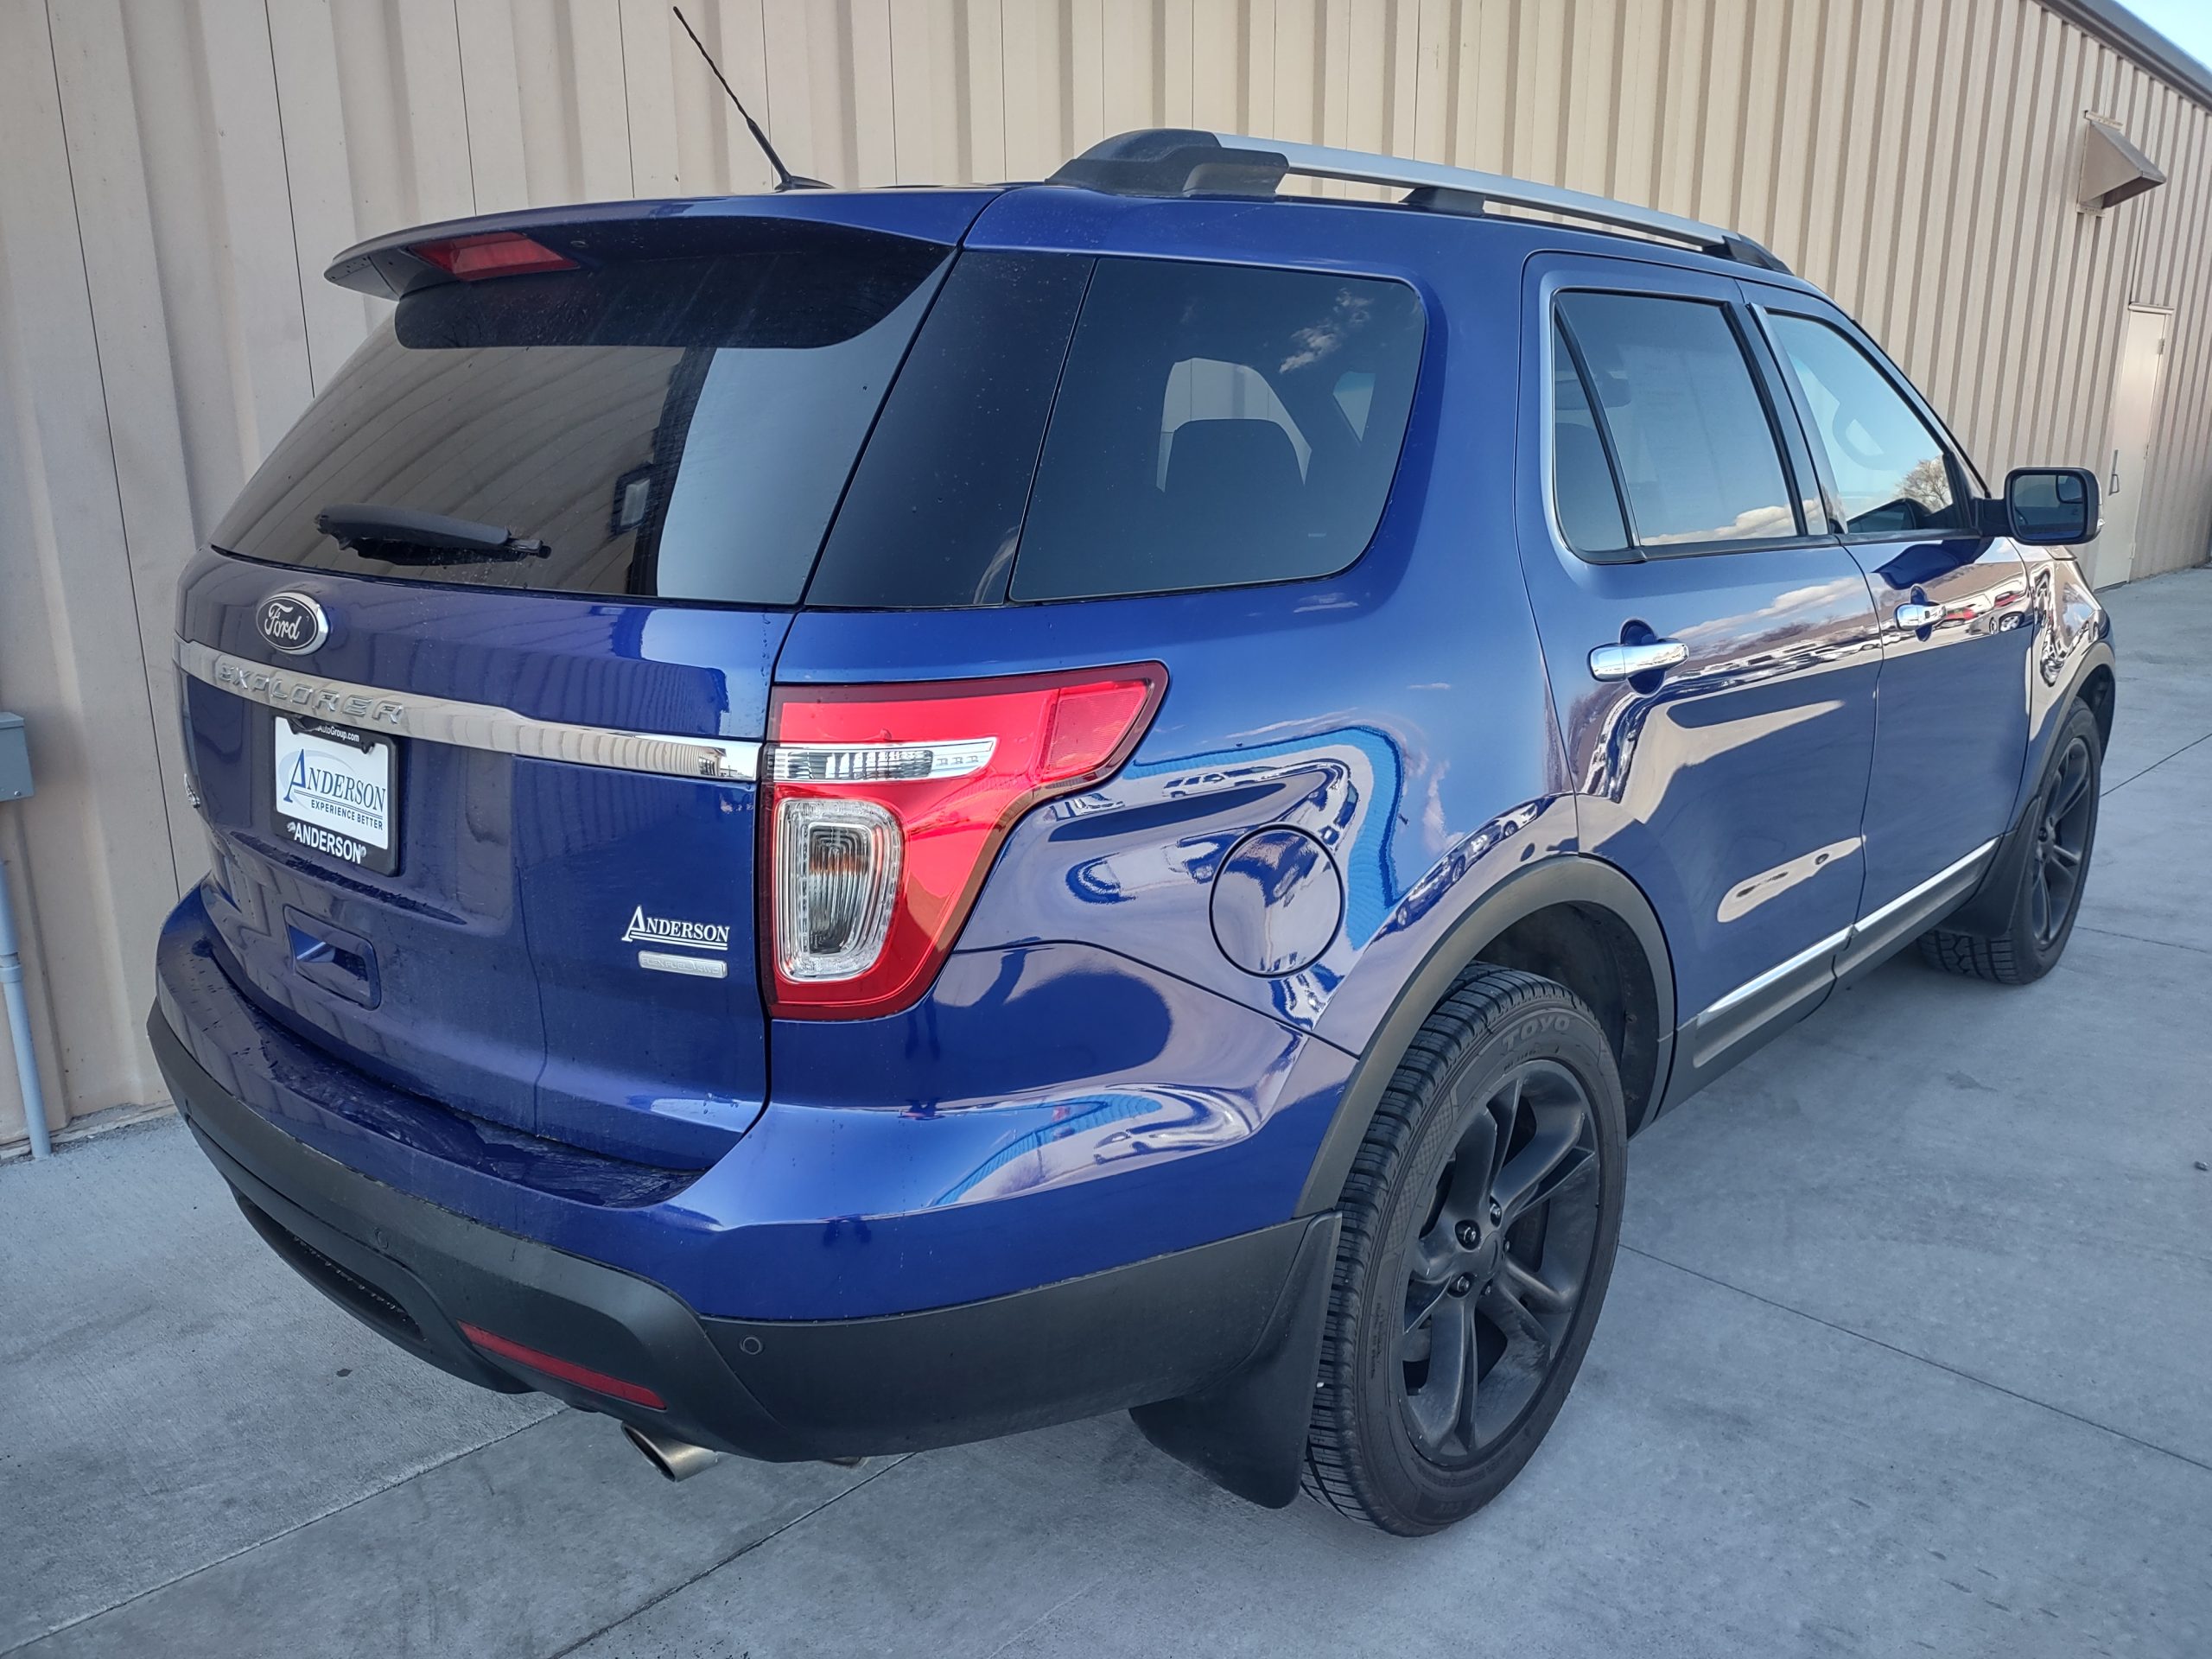 Used 2013 Ford Explorer Limited SUV for sale in 